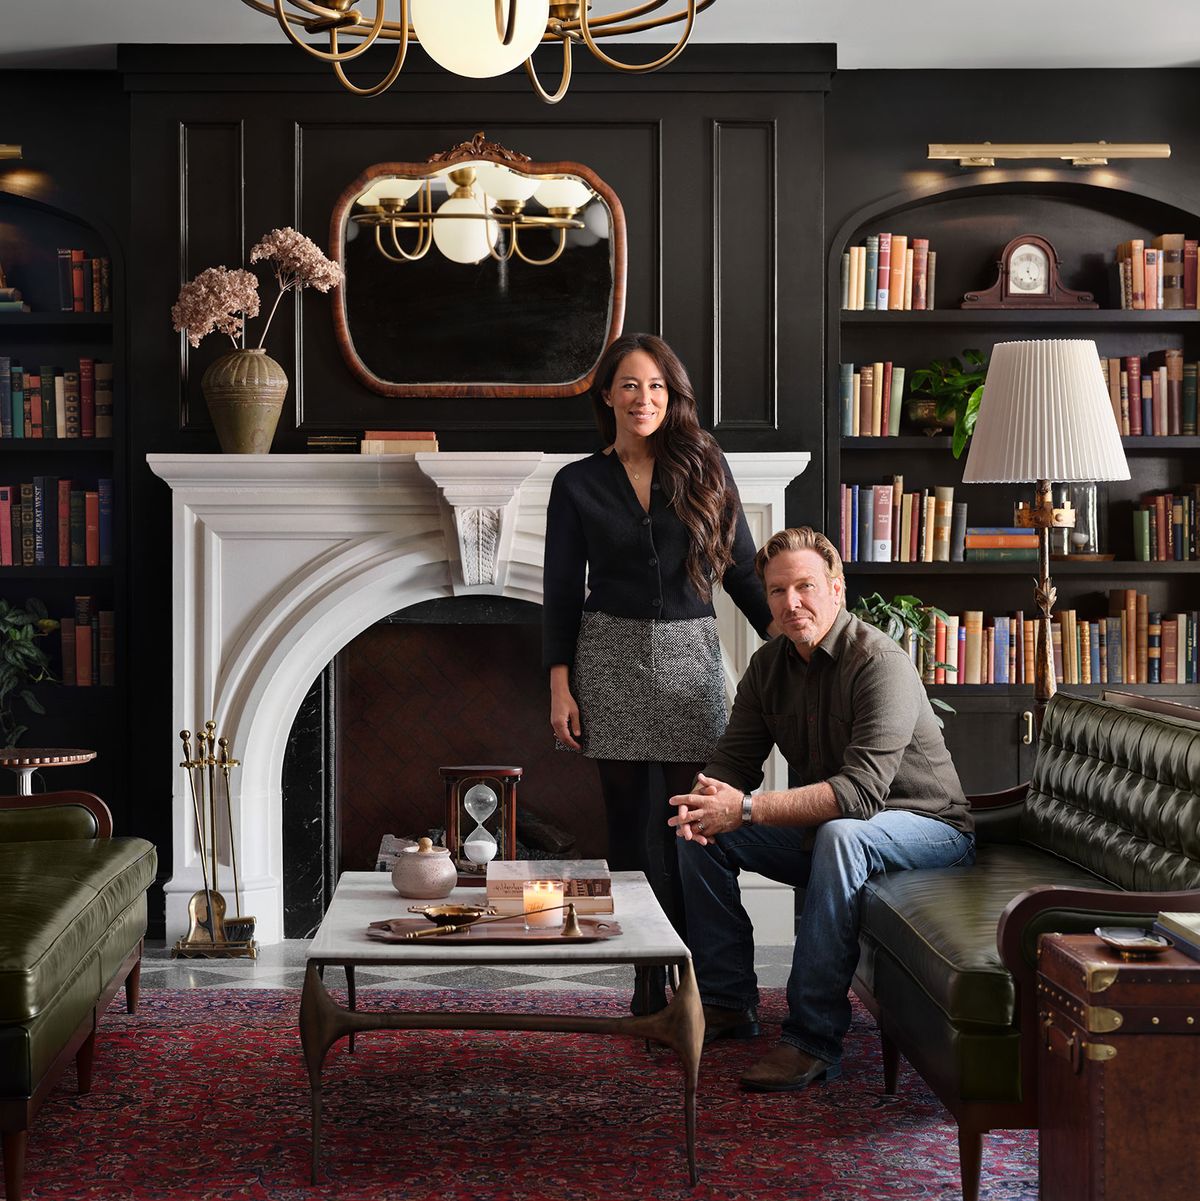 The Hotel 1928 Hotel Might Be Chip and Joanna Gaines's Biggest